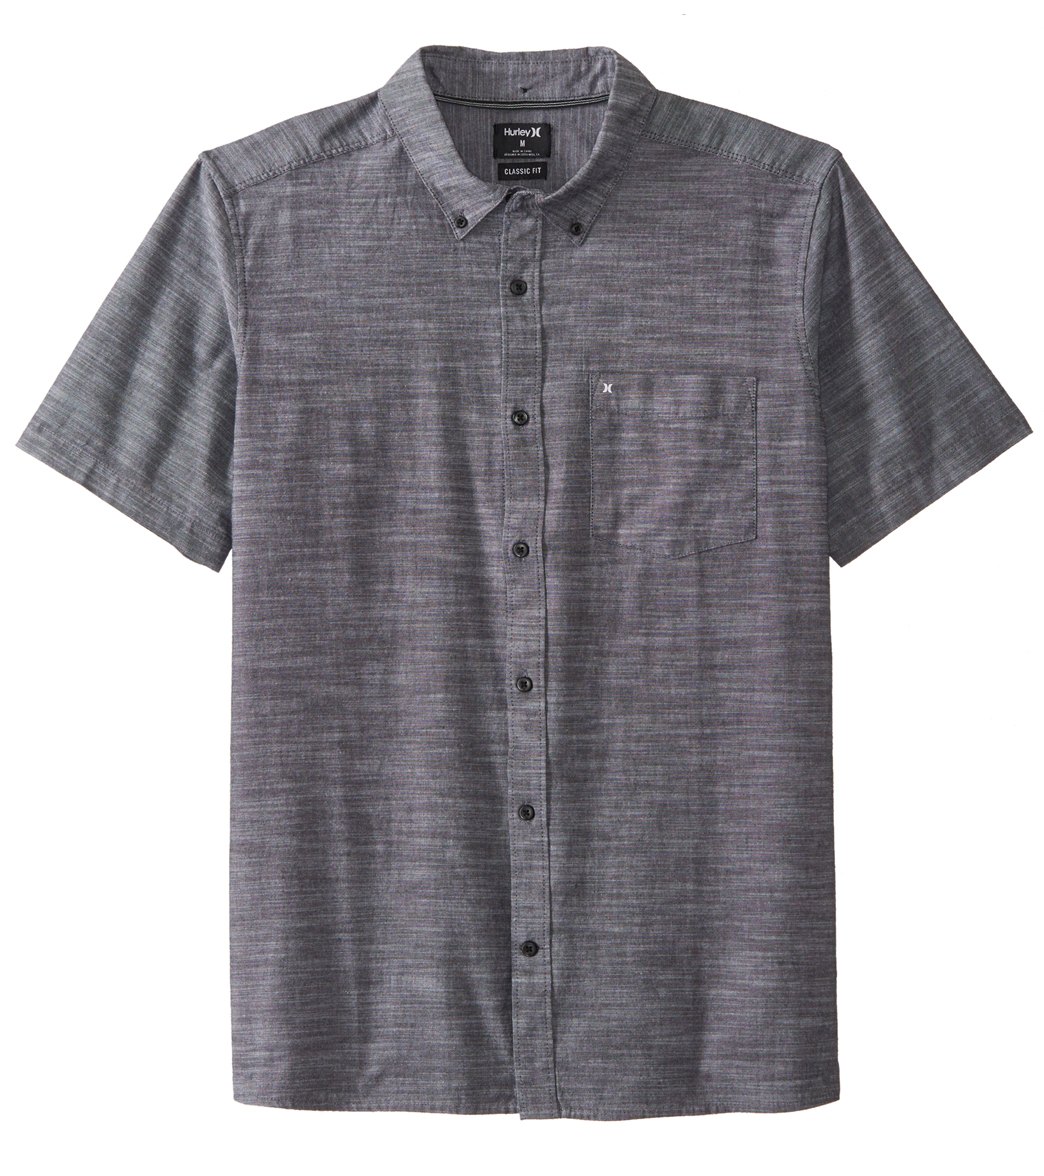 Hurley Men's One & Only 2.0 Short Sleeve Woven Shirt - Black Large Cotton - Swimoutlet.com